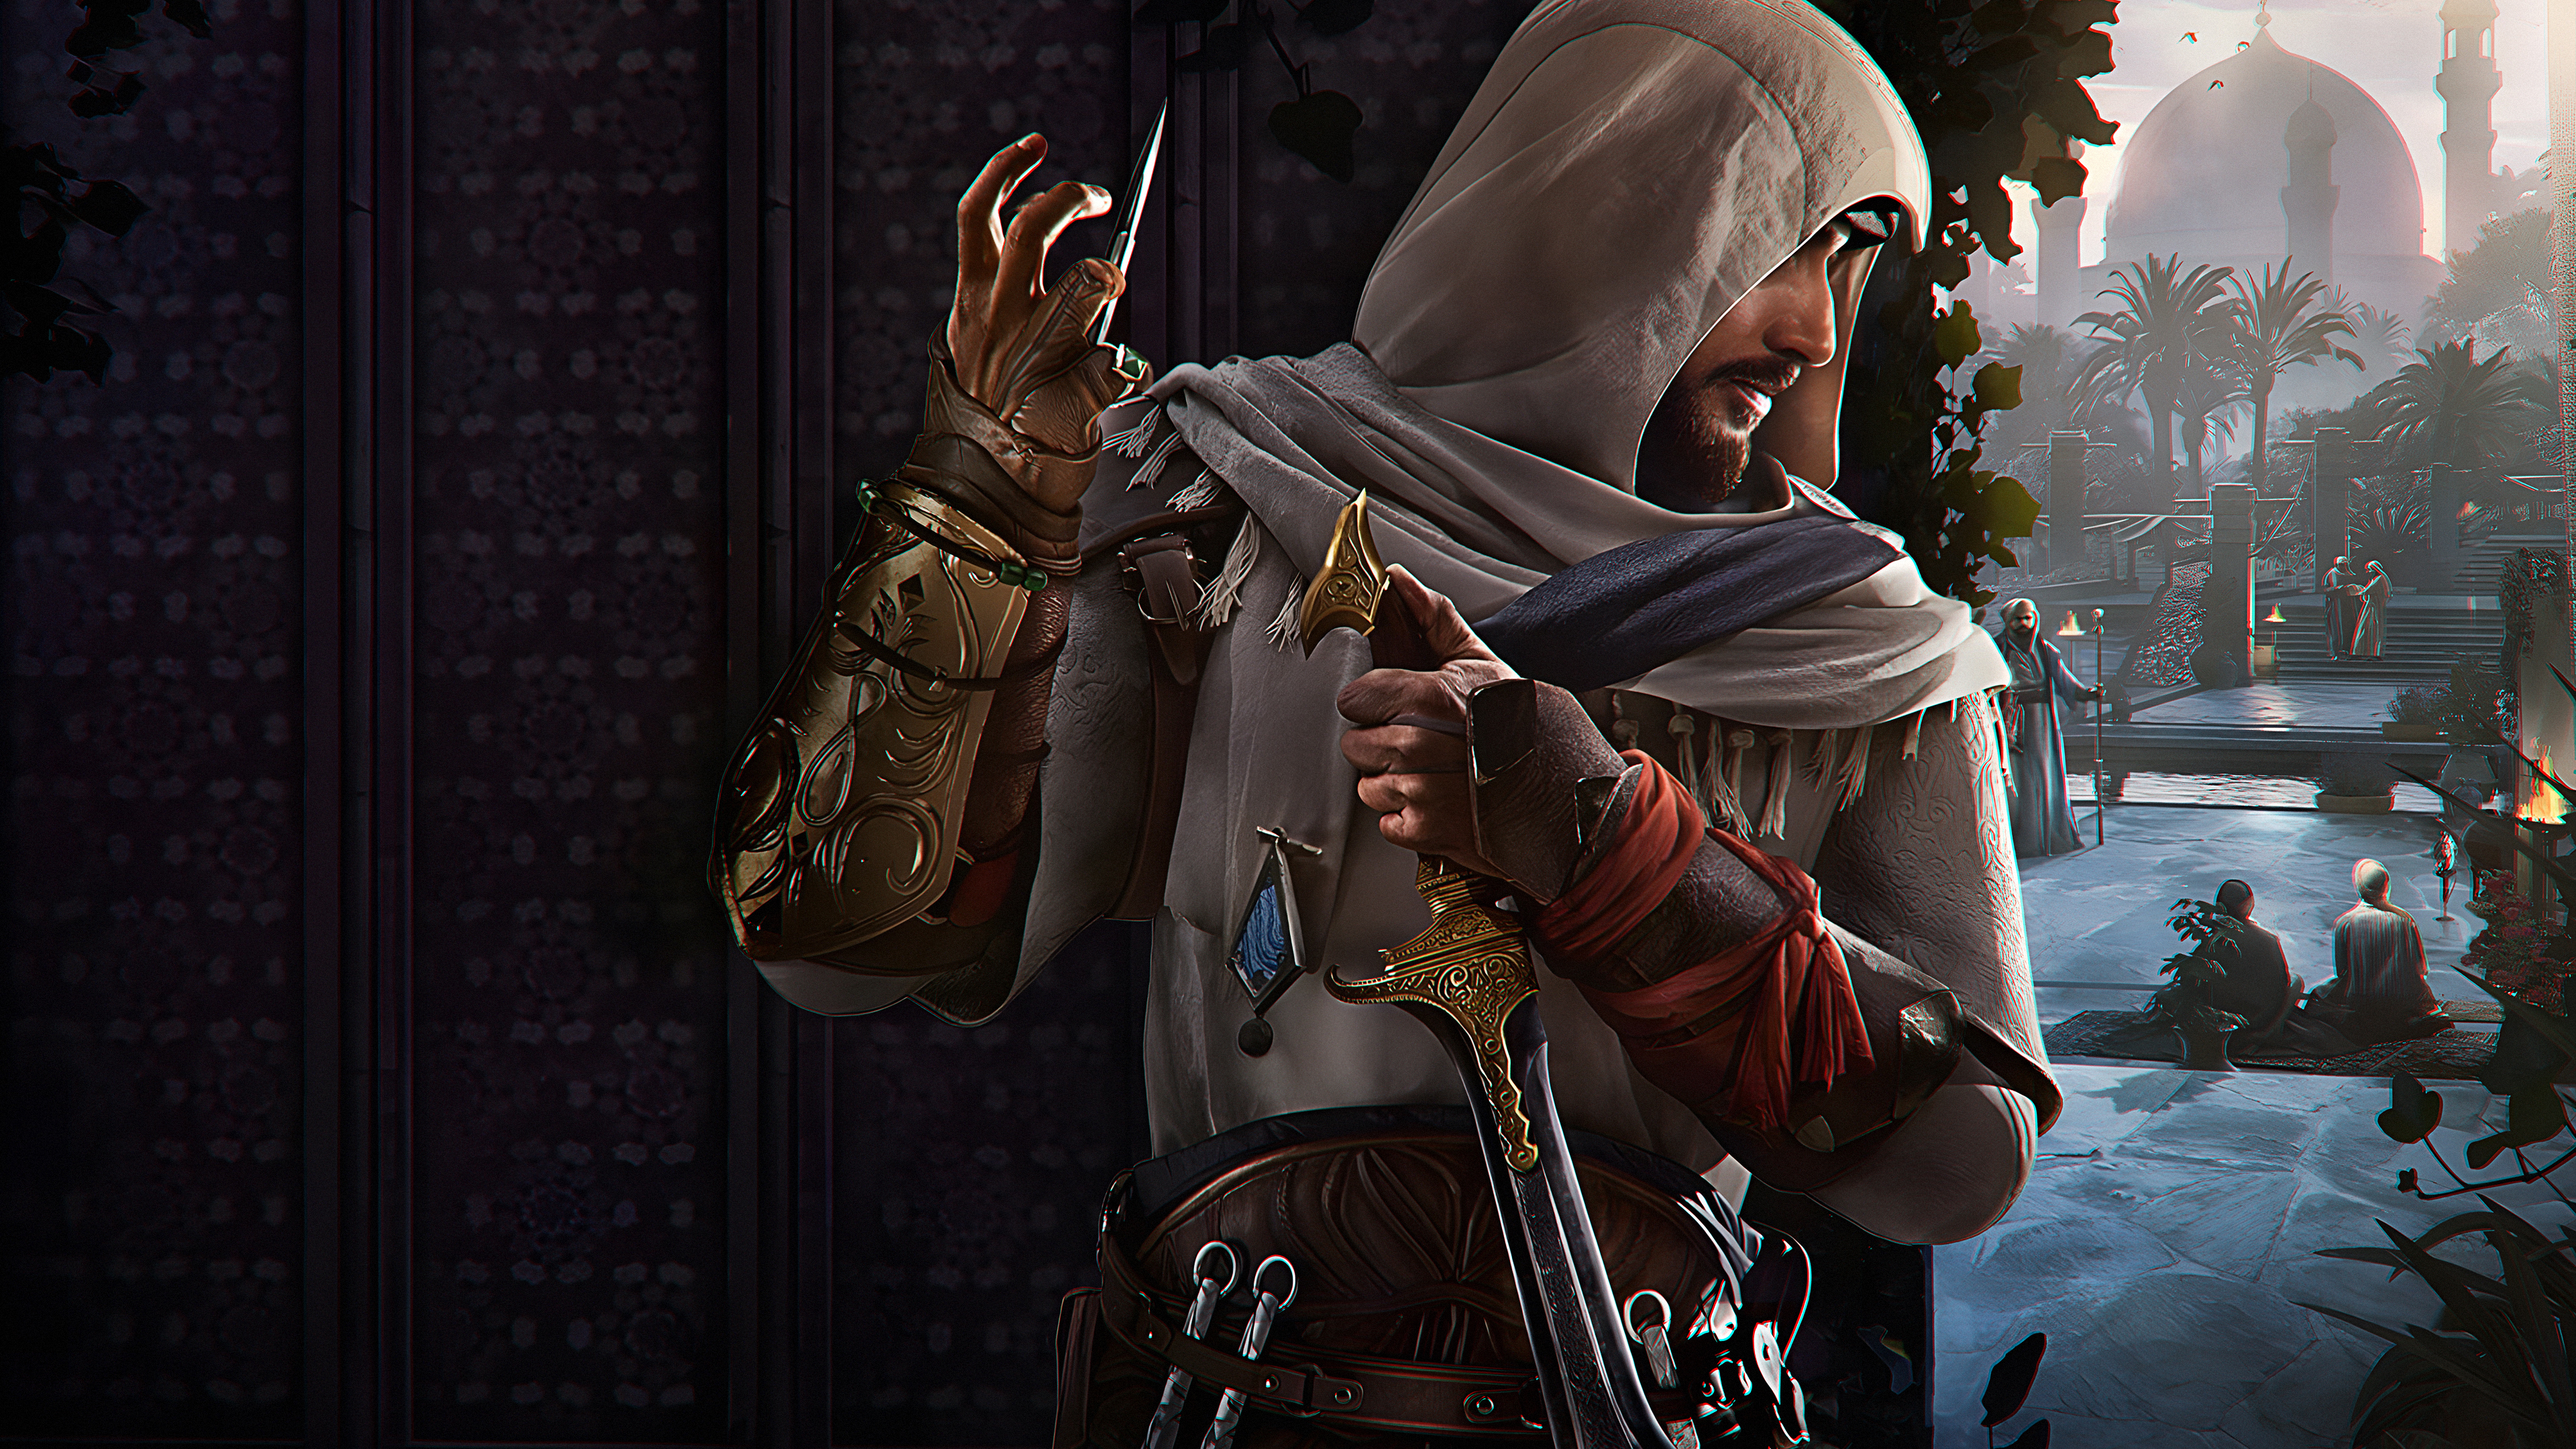 General 3840x2160 Assassin's Creed Mirage 4K Assassin's Creed Ubisoft video games video game men video game characters Basim (Assassin's Creed) chromatic aberration